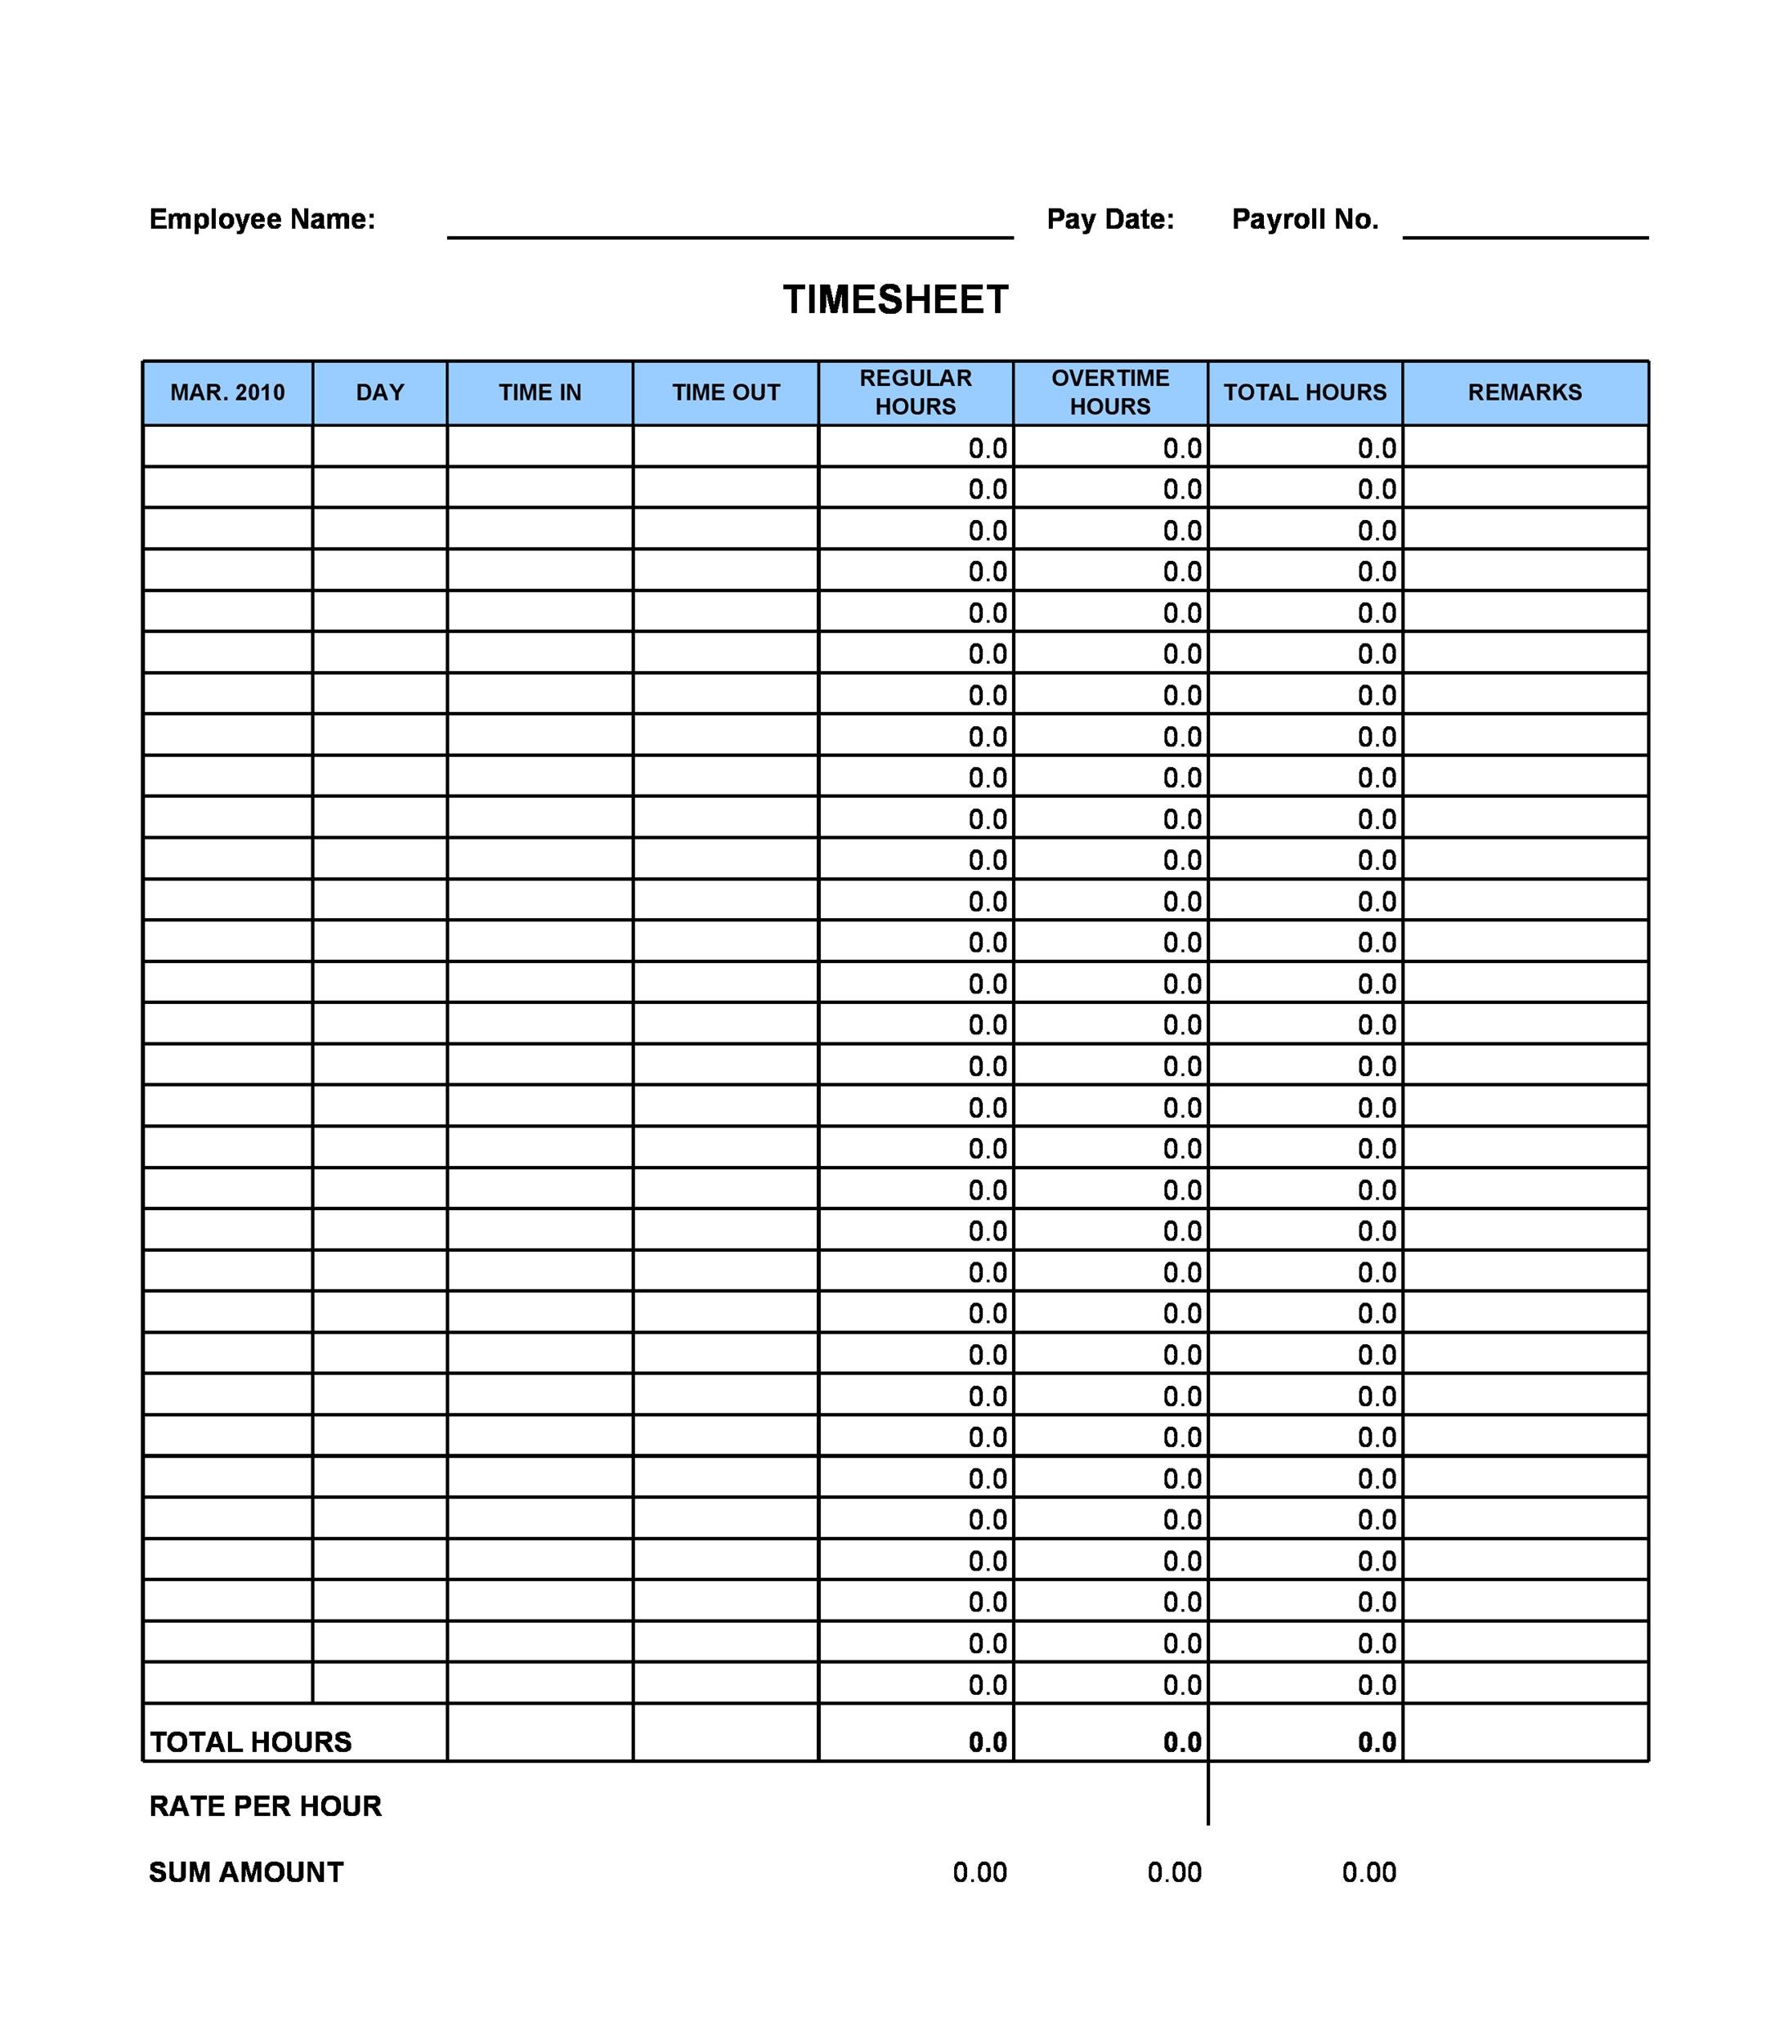 40 Free Timesheet Templates [in Excel] ᐅ TemplateLab